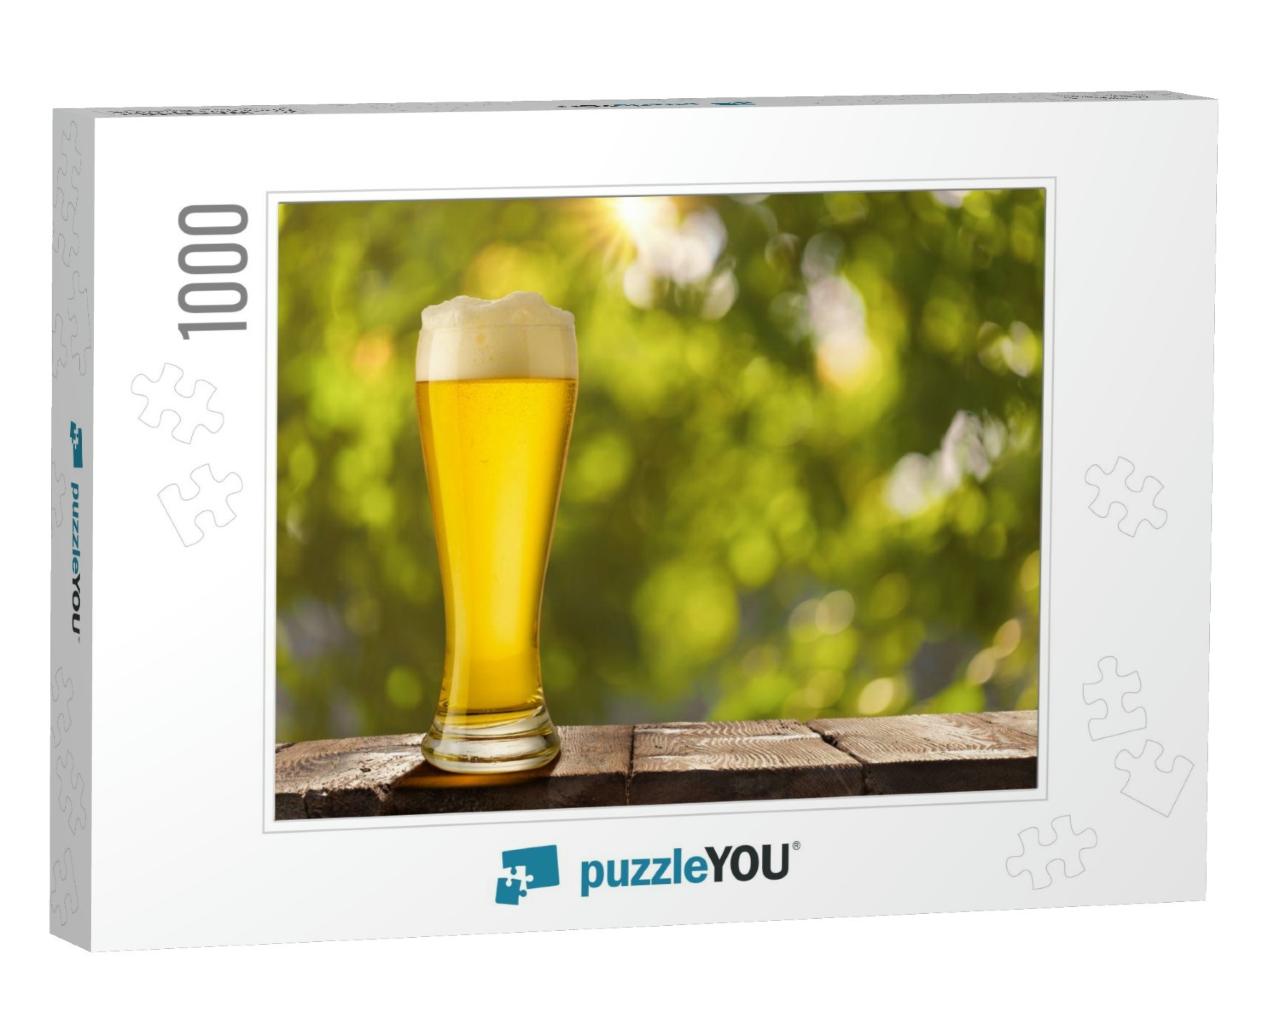 Pint of Foamy Beer in Sunlight Rays on Rustic Wooden Tabl... Jigsaw Puzzle with 1000 pieces